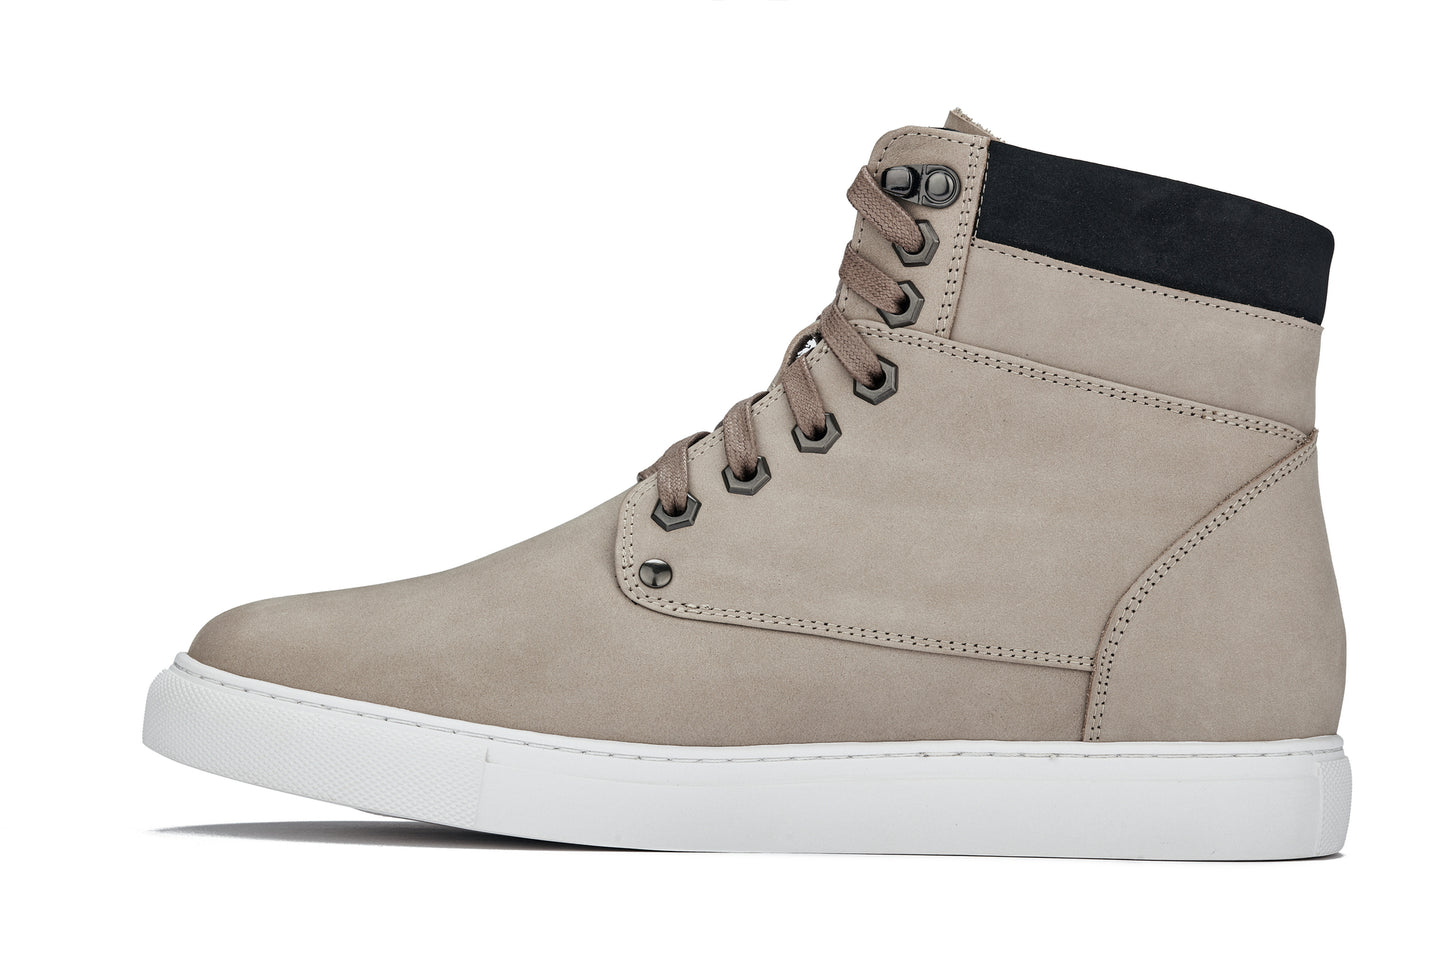 CALTO - T53122 - 2.6 Inches Taller (Taupe) - High top sneak-boot